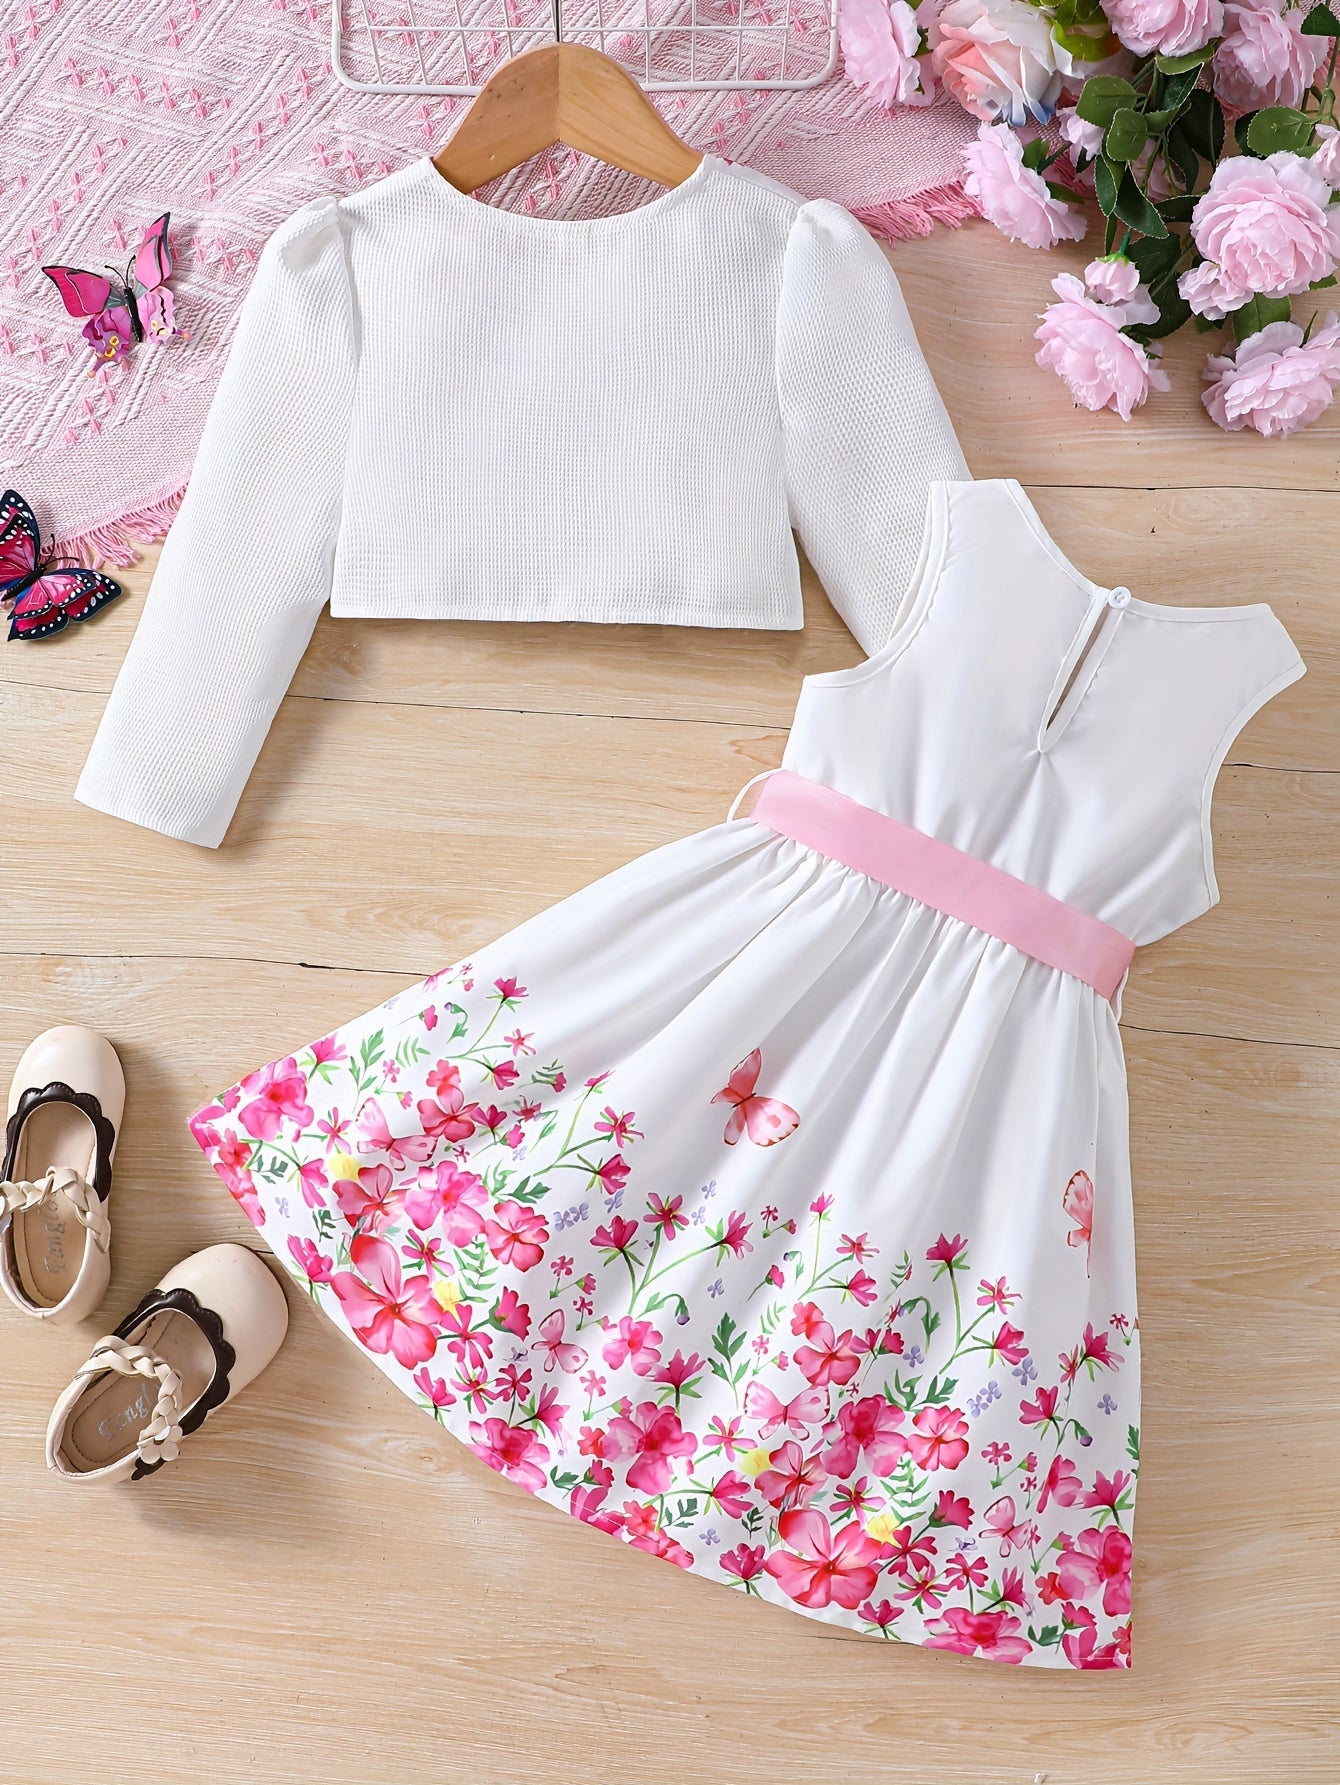 Girls Adorable Long Sleeve Cardigan & Floral Sundress Set - Soft & Stylish Two-piece Outfit for Daily Summer Adventures